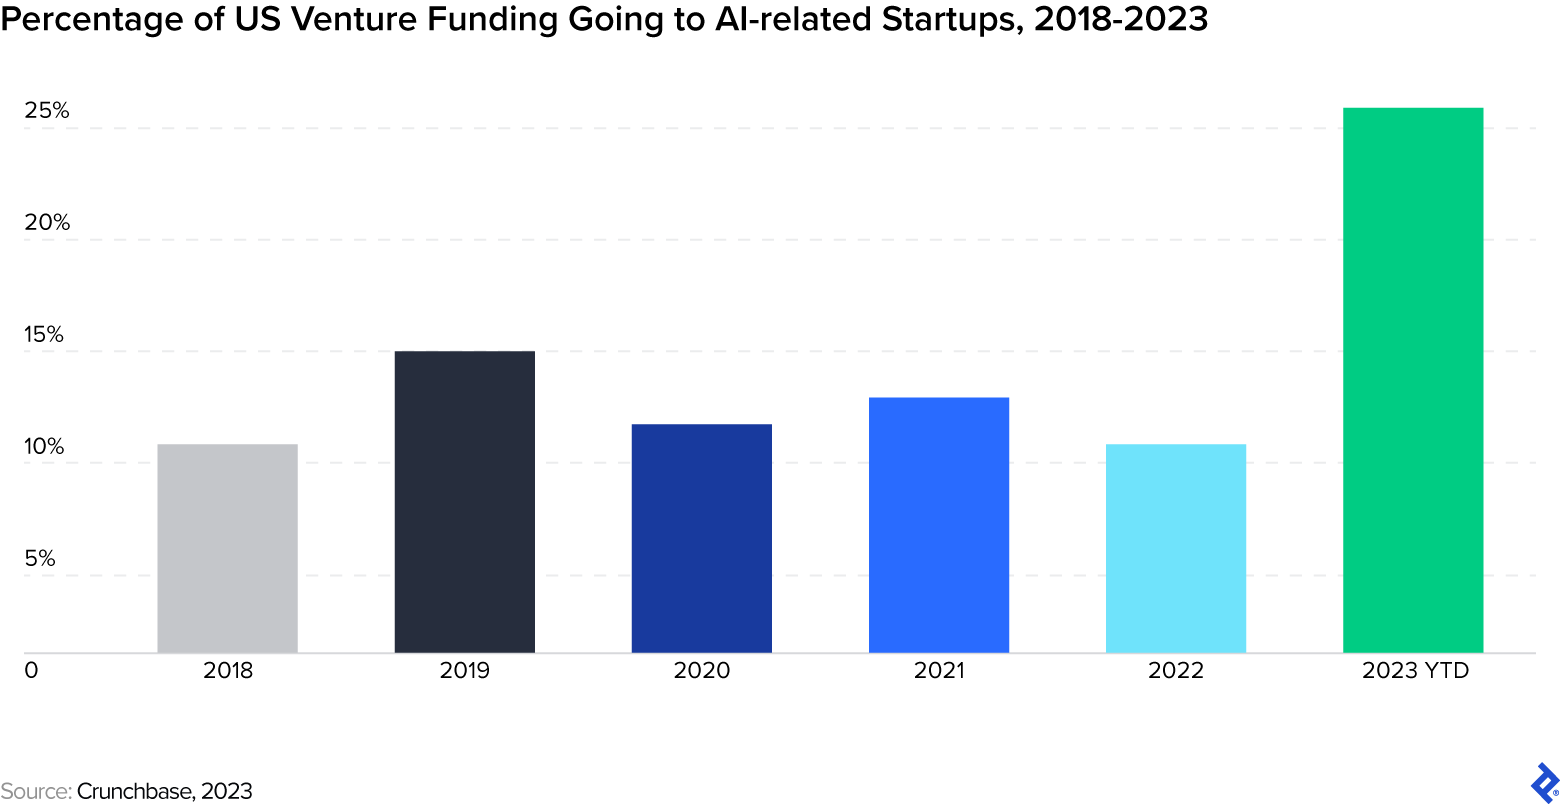 The percentage of US venture funding going to AI-related startups from 2018 to 2023 shows a huge increase in AI investment in the past year.